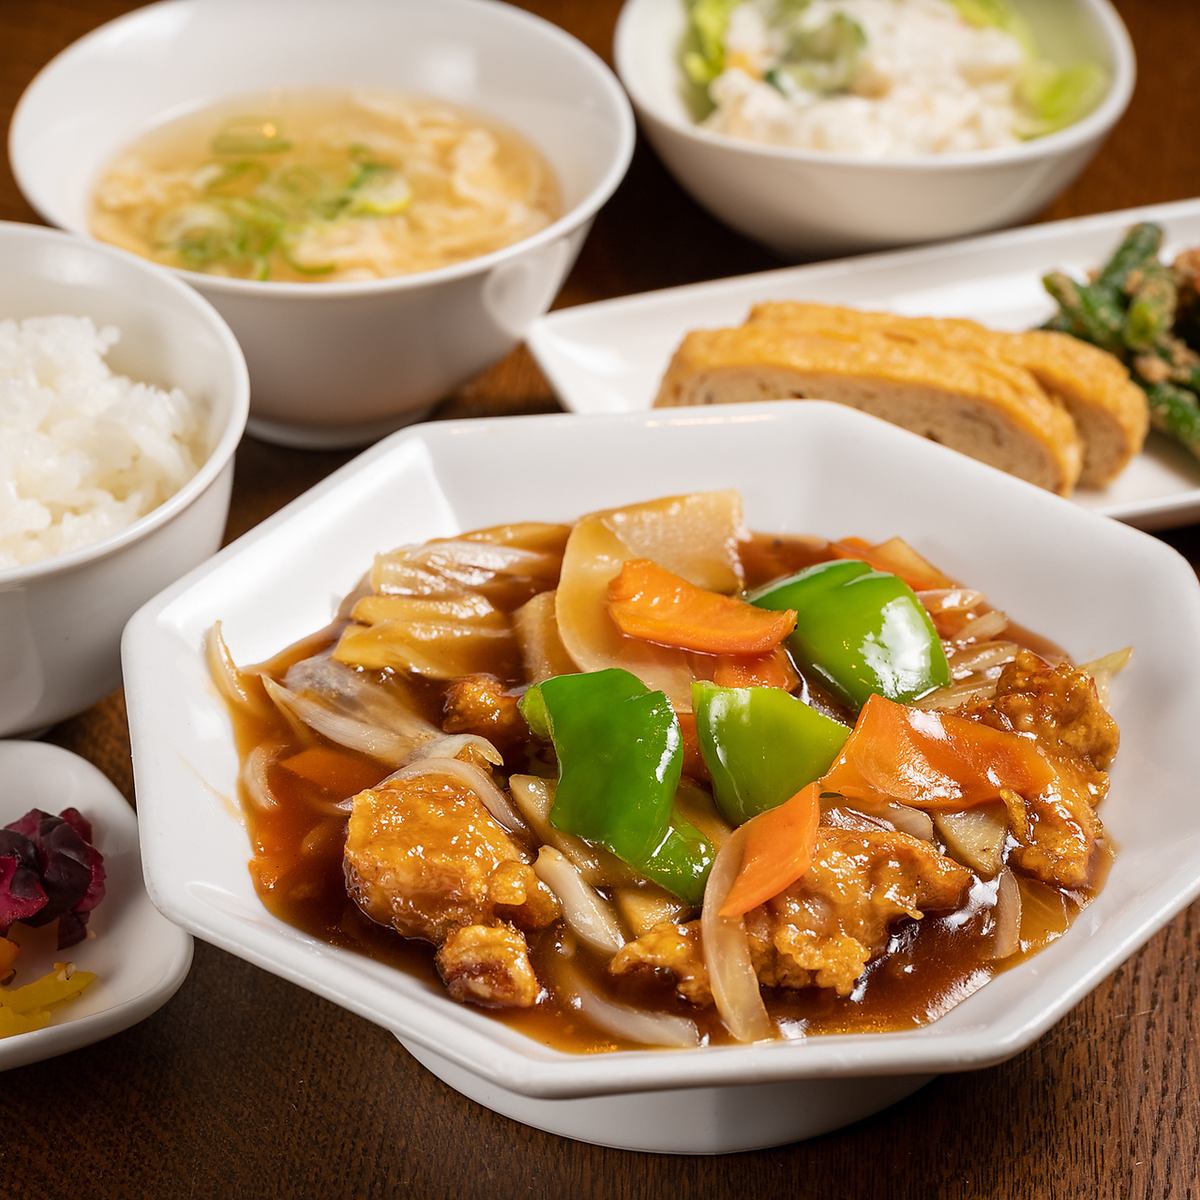 You can enjoy delicious Chinese food in the stylish restaurant ★